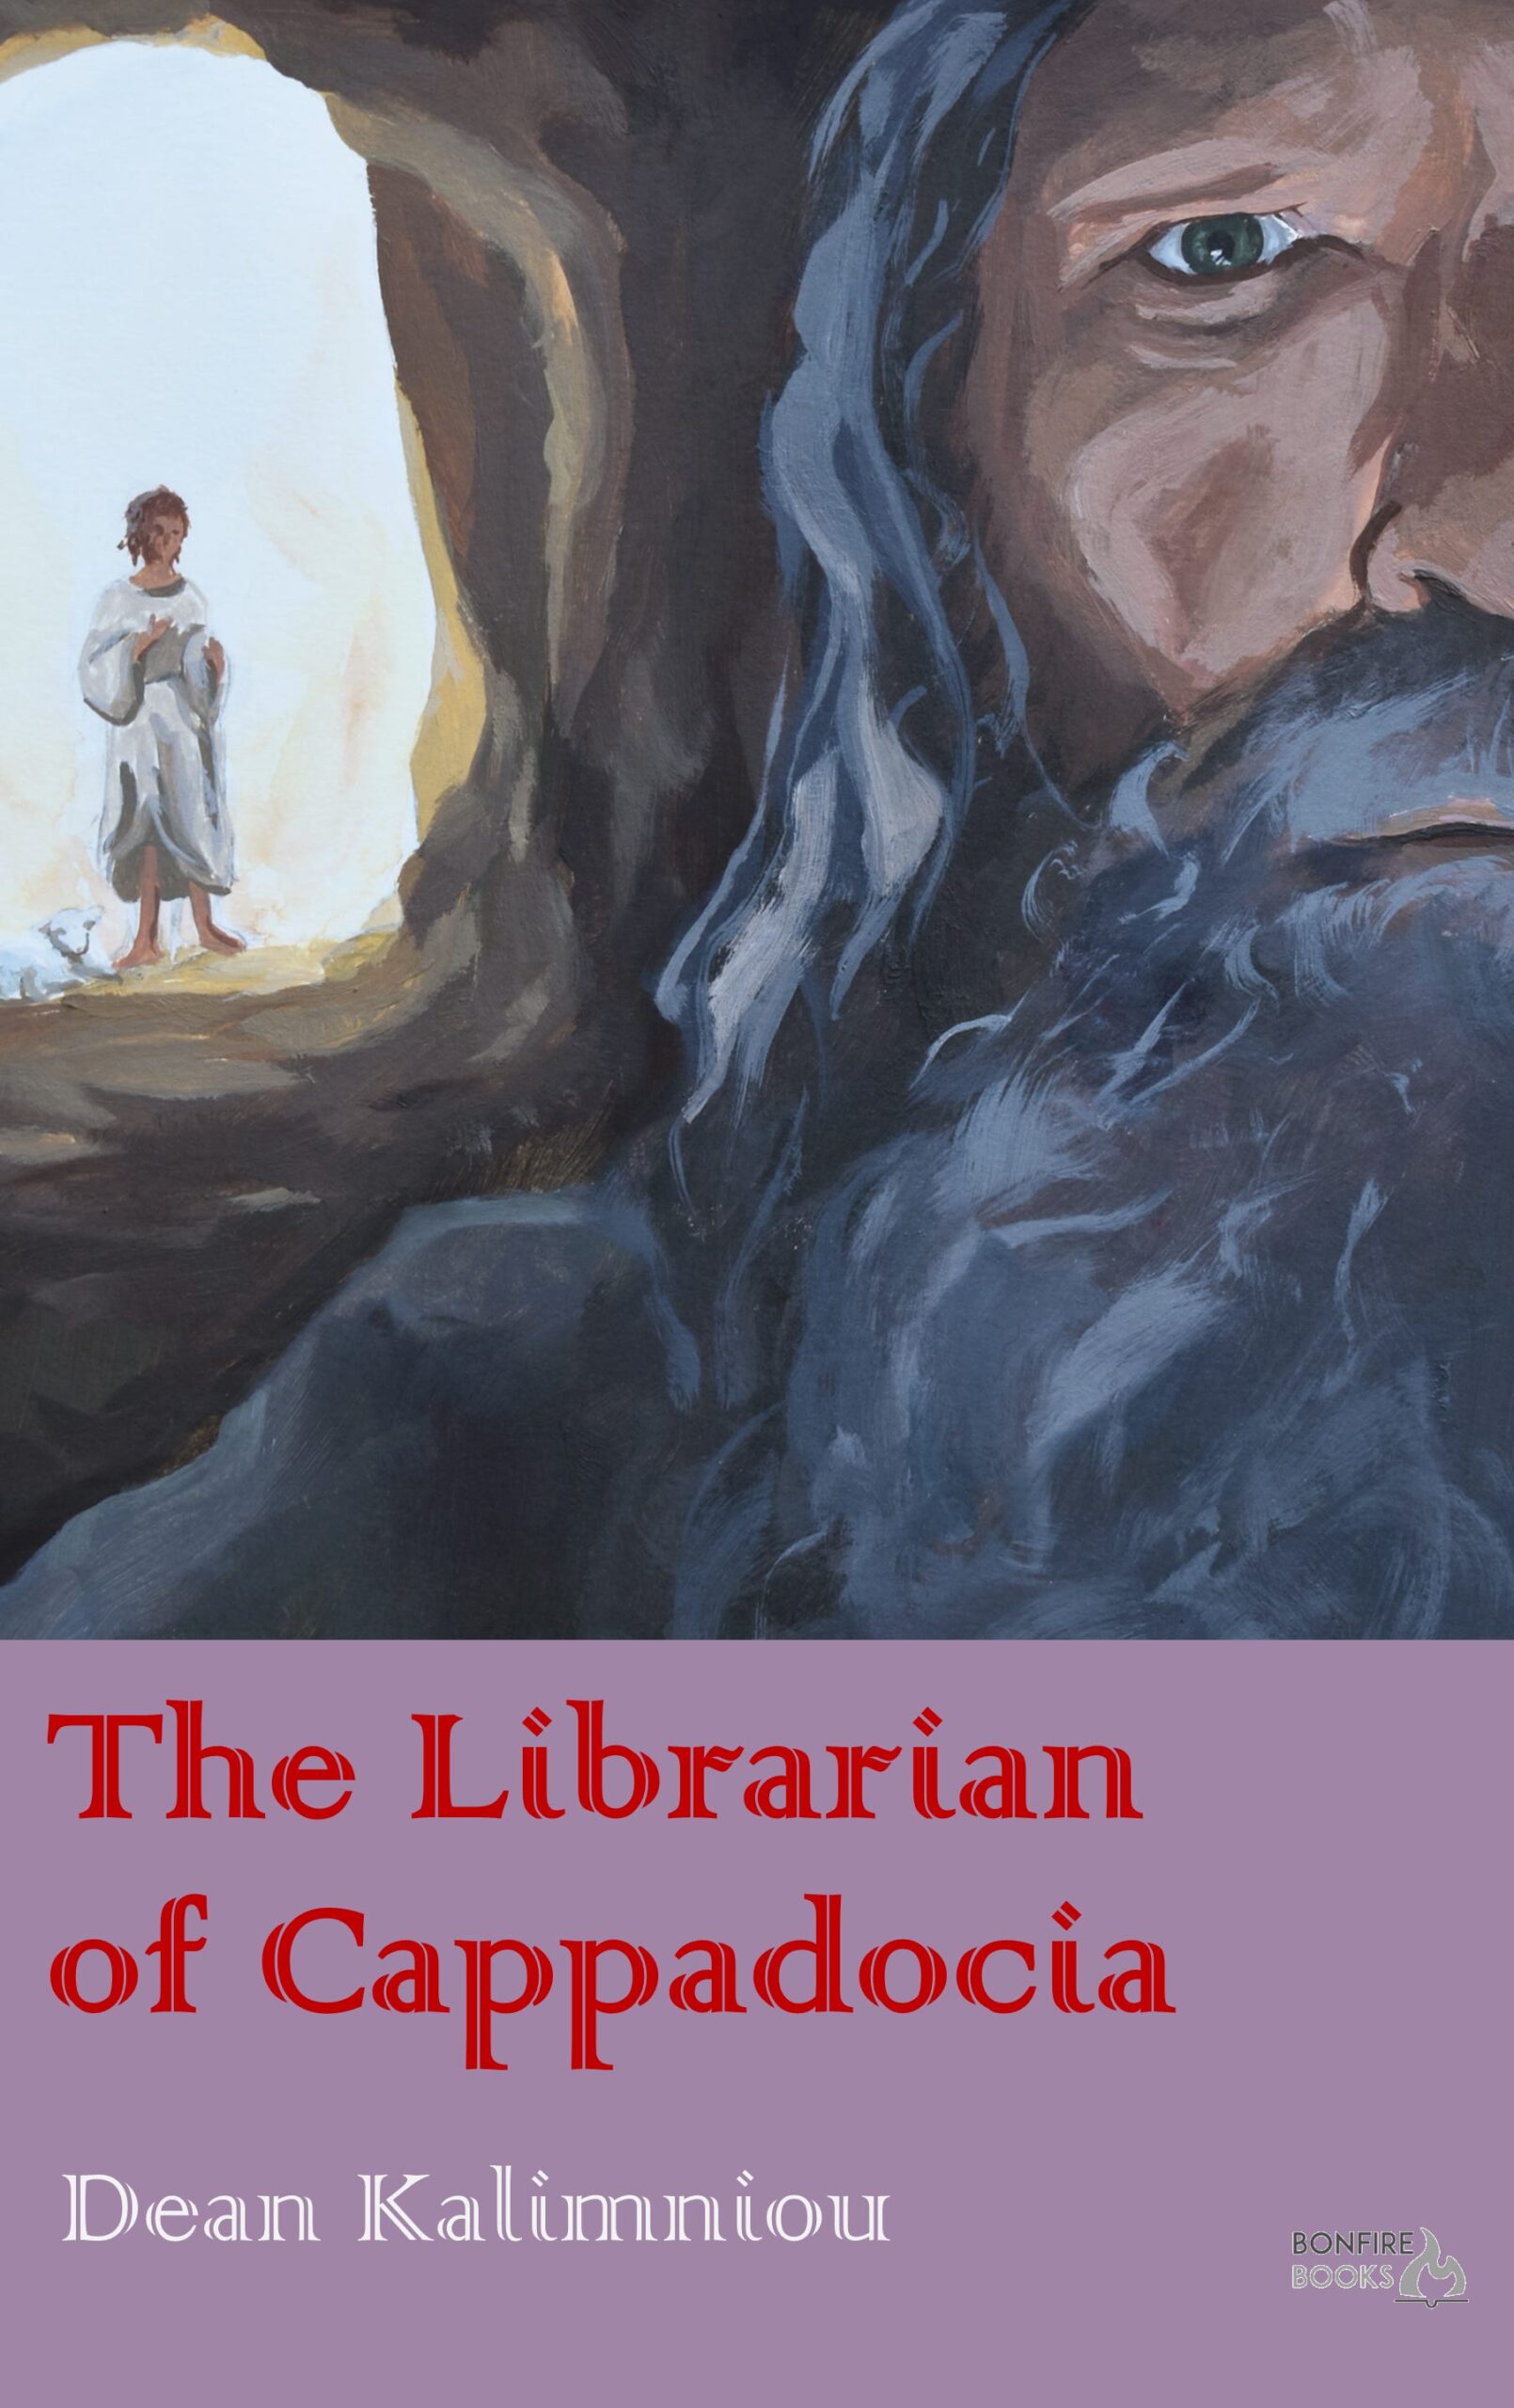 The Librarian of Cappadocia is now available to pre-order